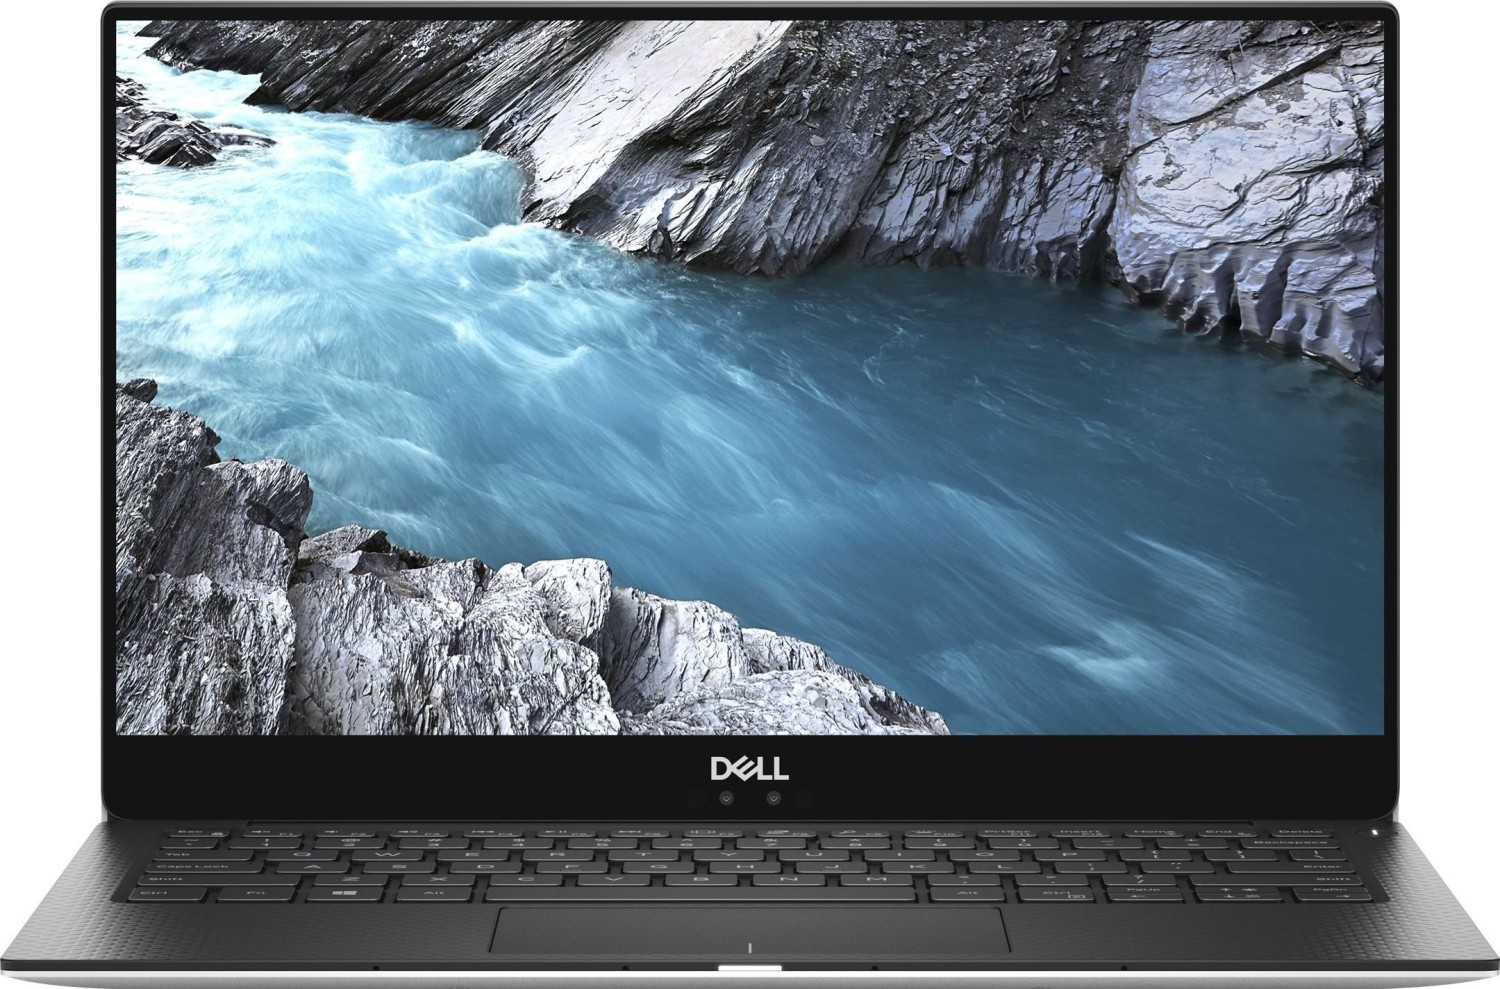 DELL XPS 13 9370【即購入OK】